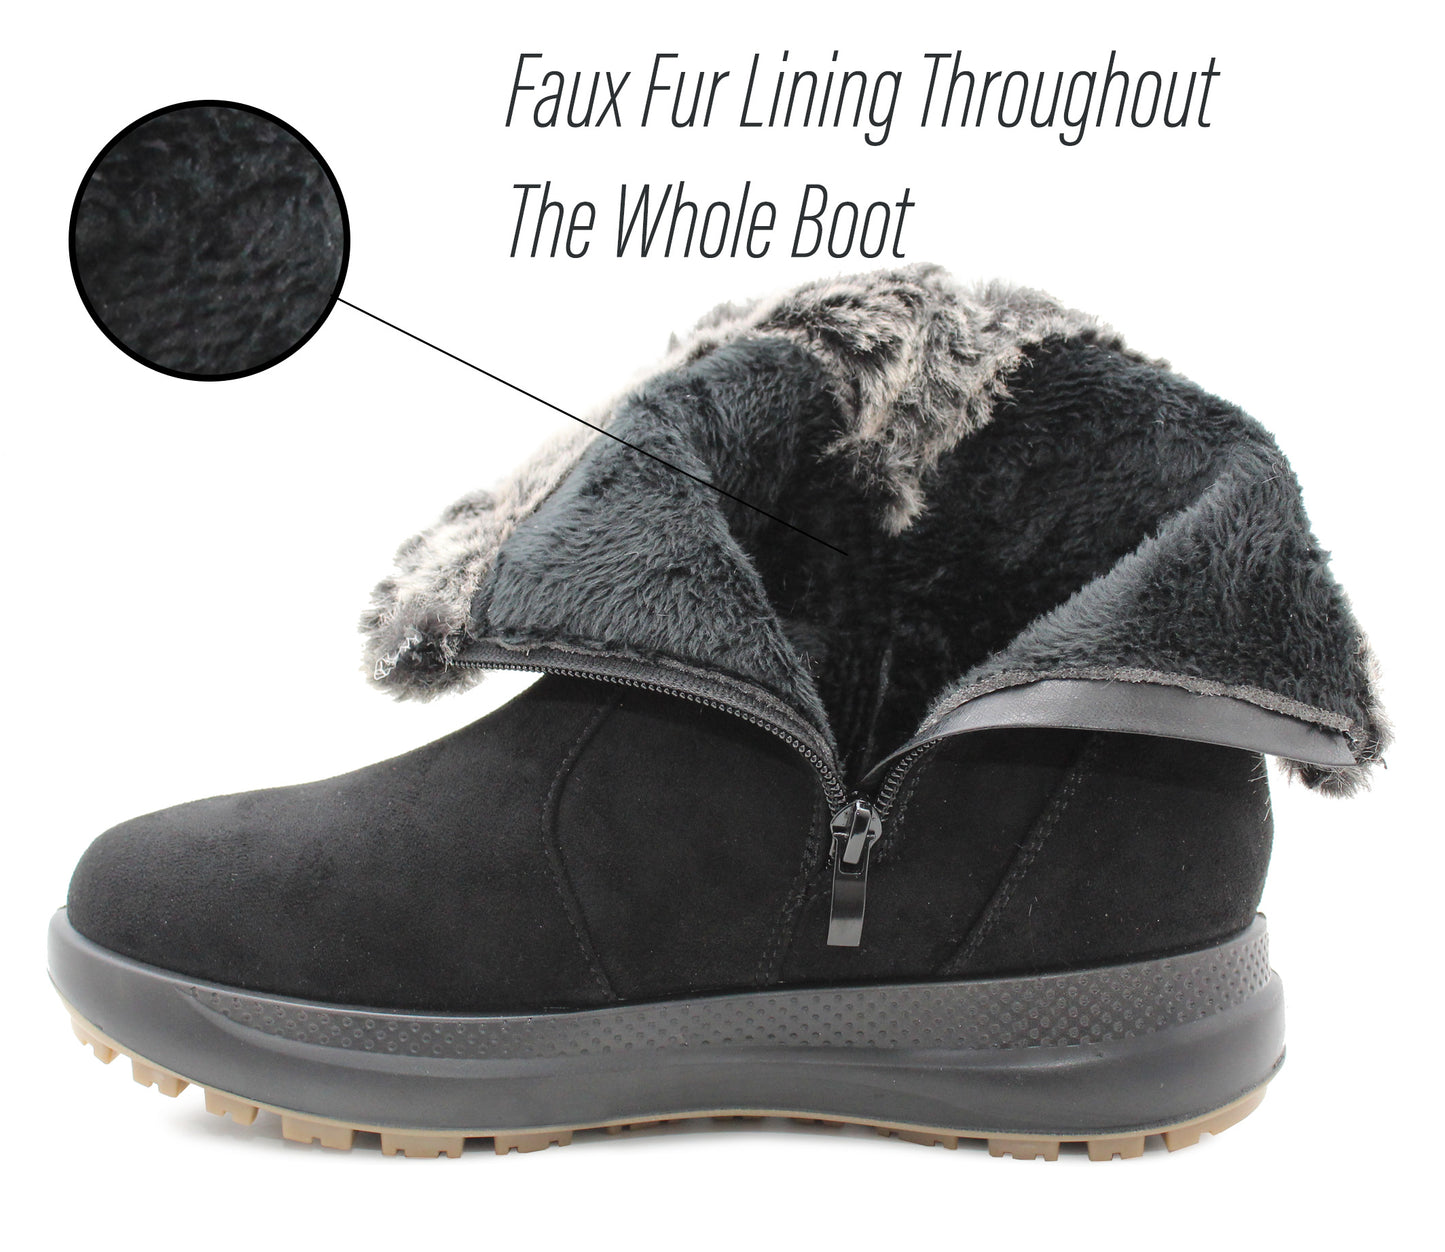 Womens Faux Fur Lined Winter Boots Ladies Faux Suede Zip Up Mid Calf Fashion Ankle Boots